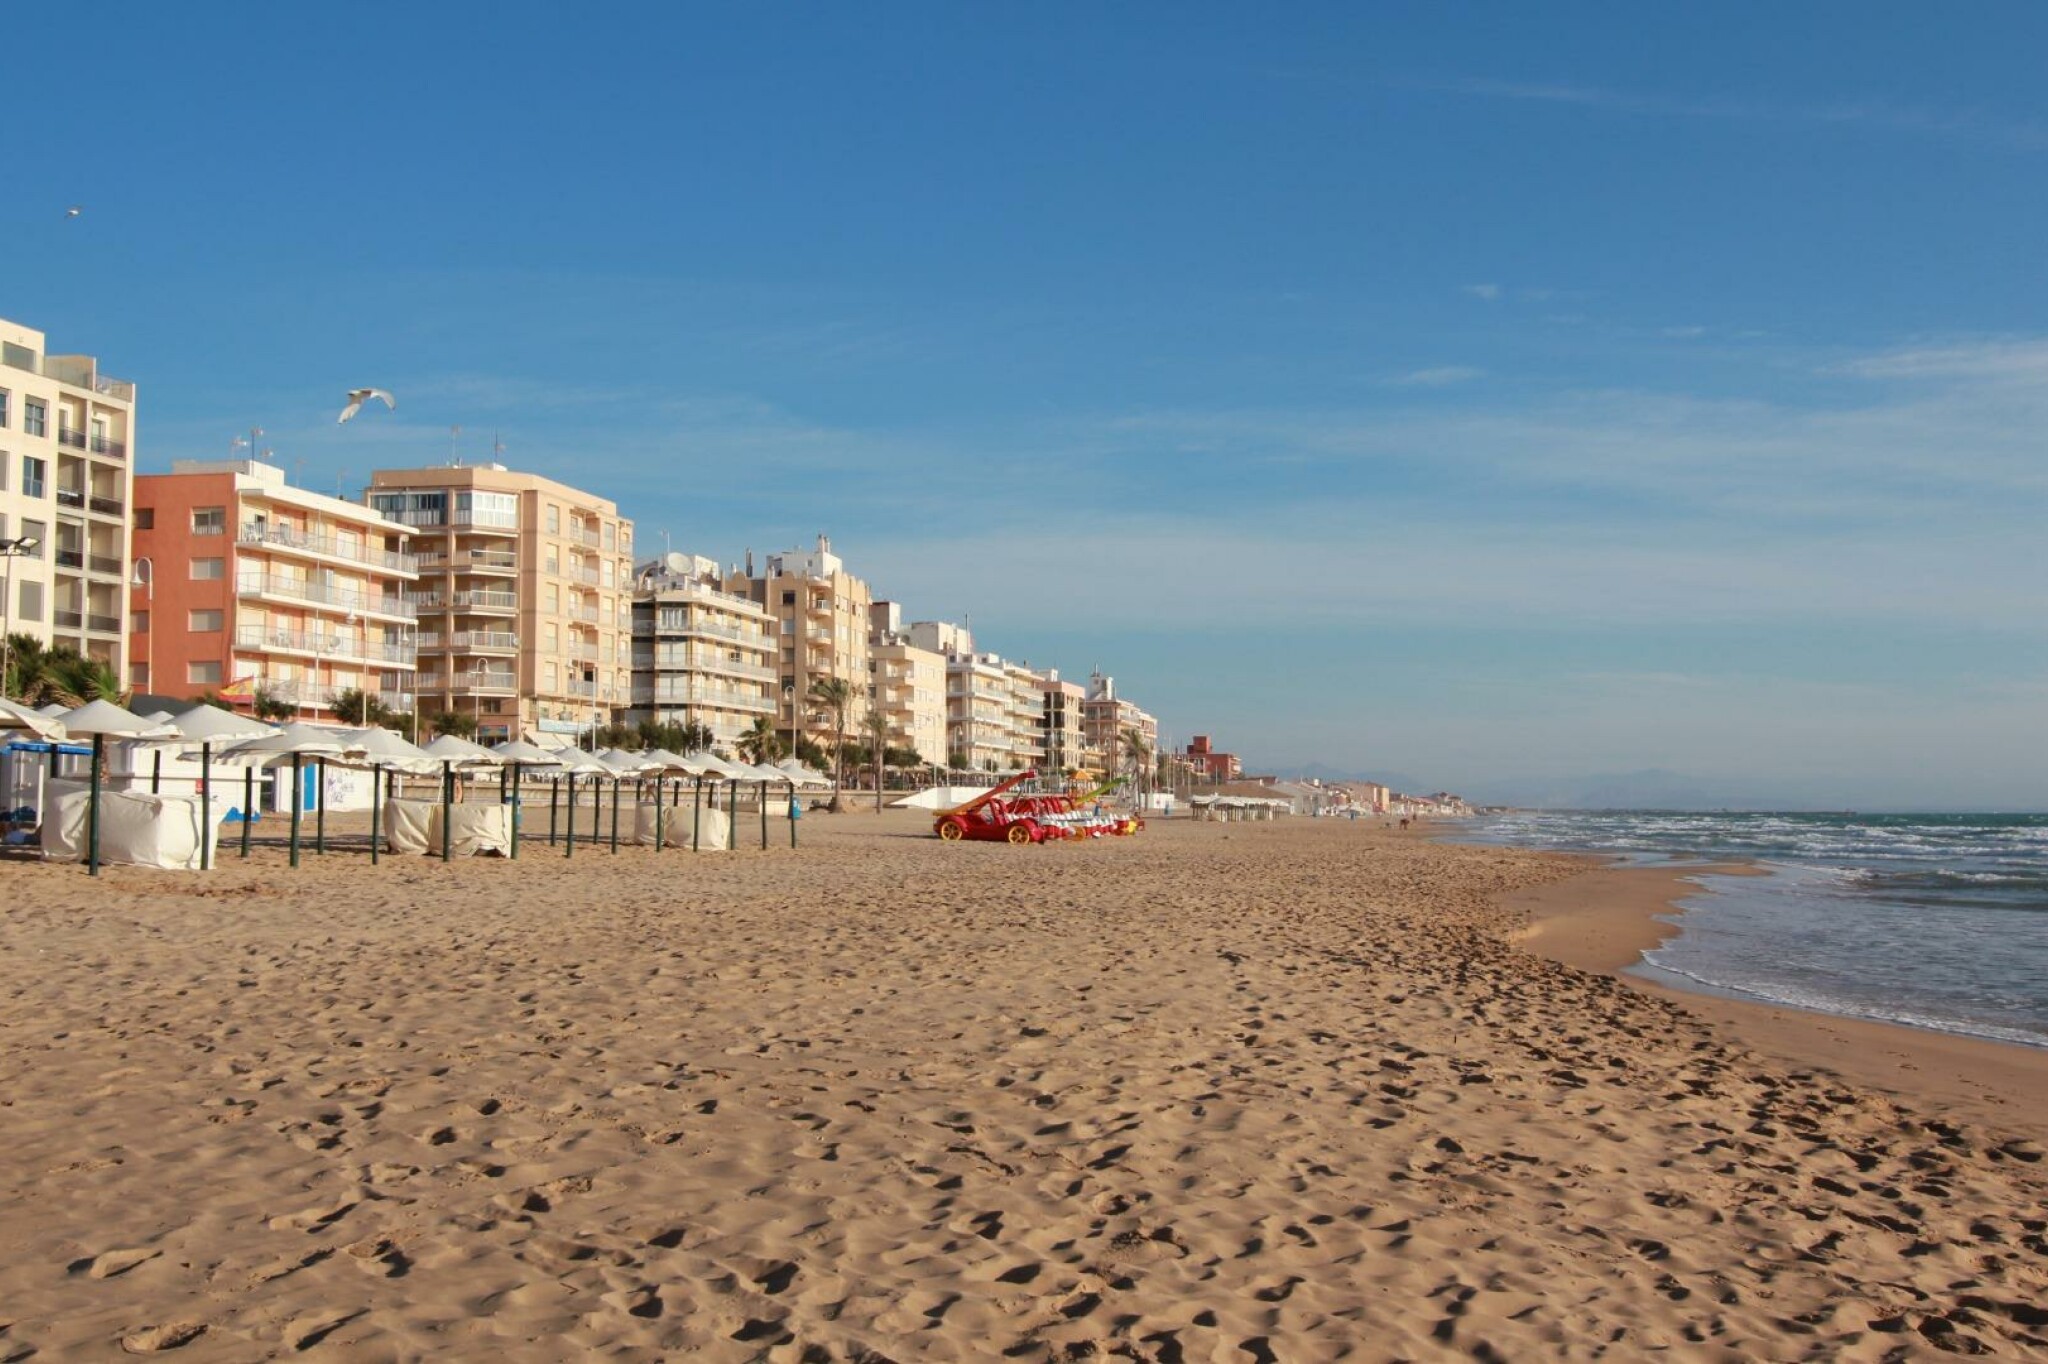 Demand for rentals on the Costa Blanca is soaring